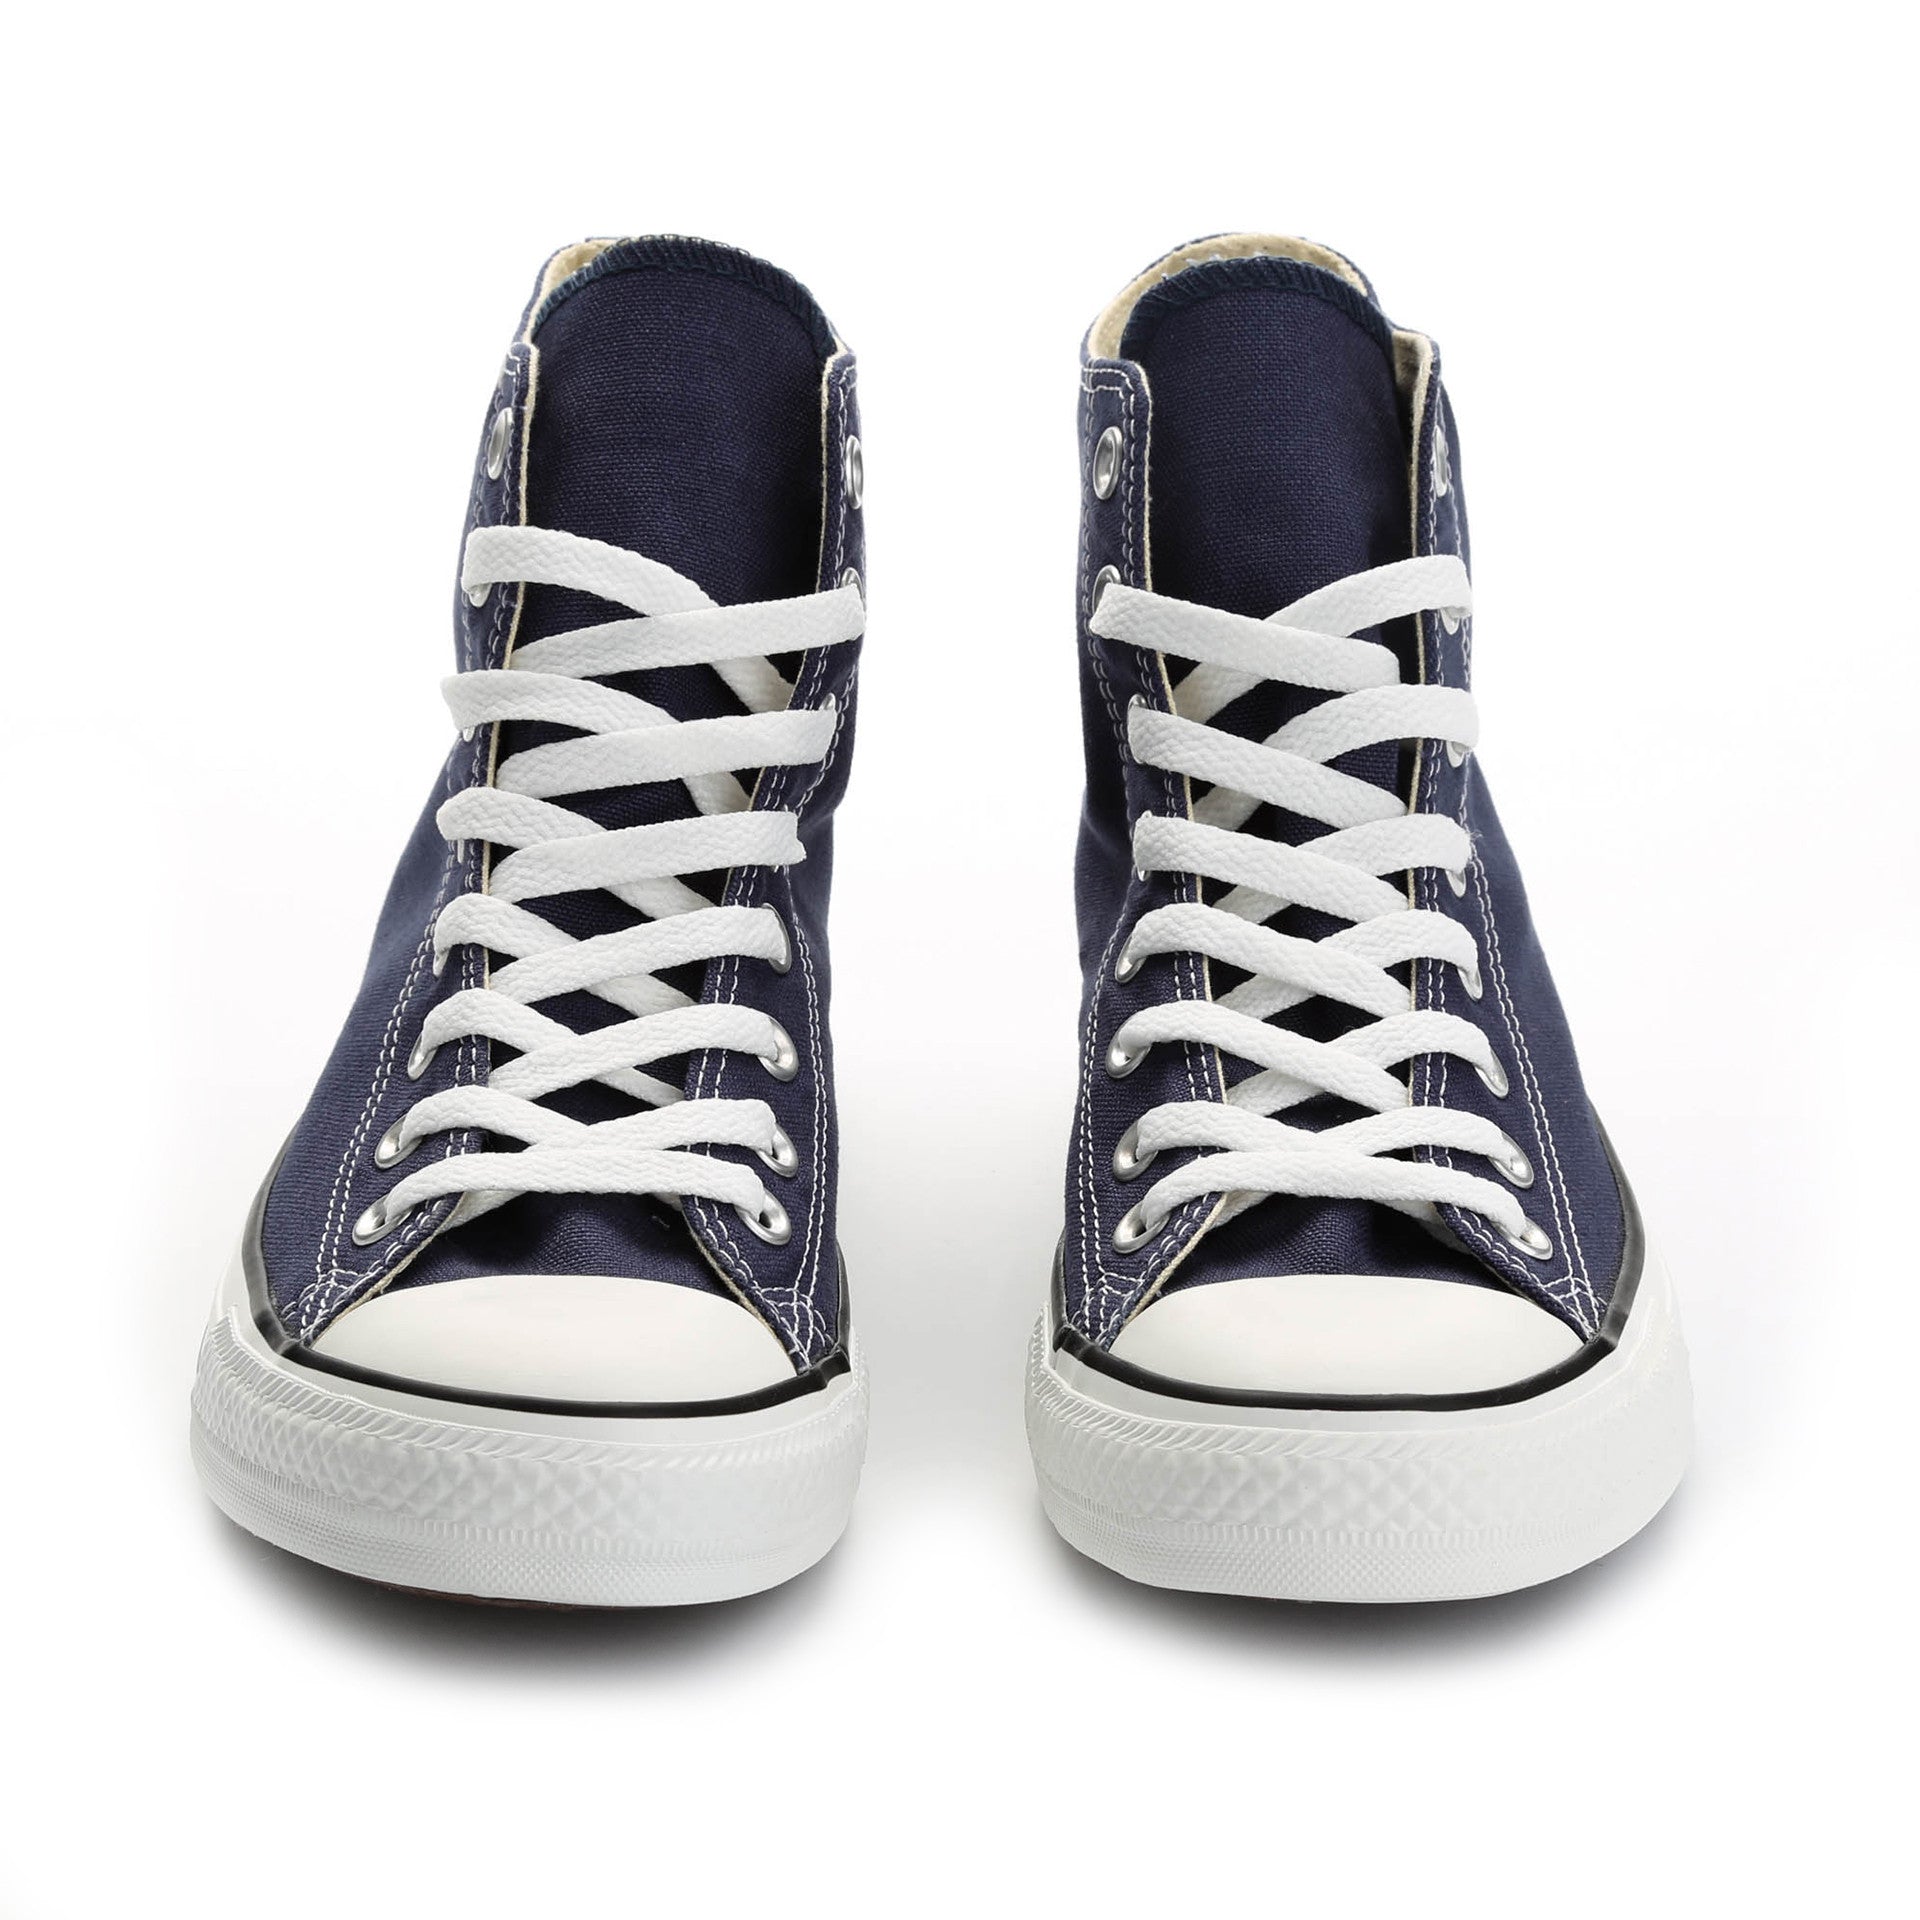 Learn about 61+ imagen converse shoes front view - In.thptnganamst.edu.vn